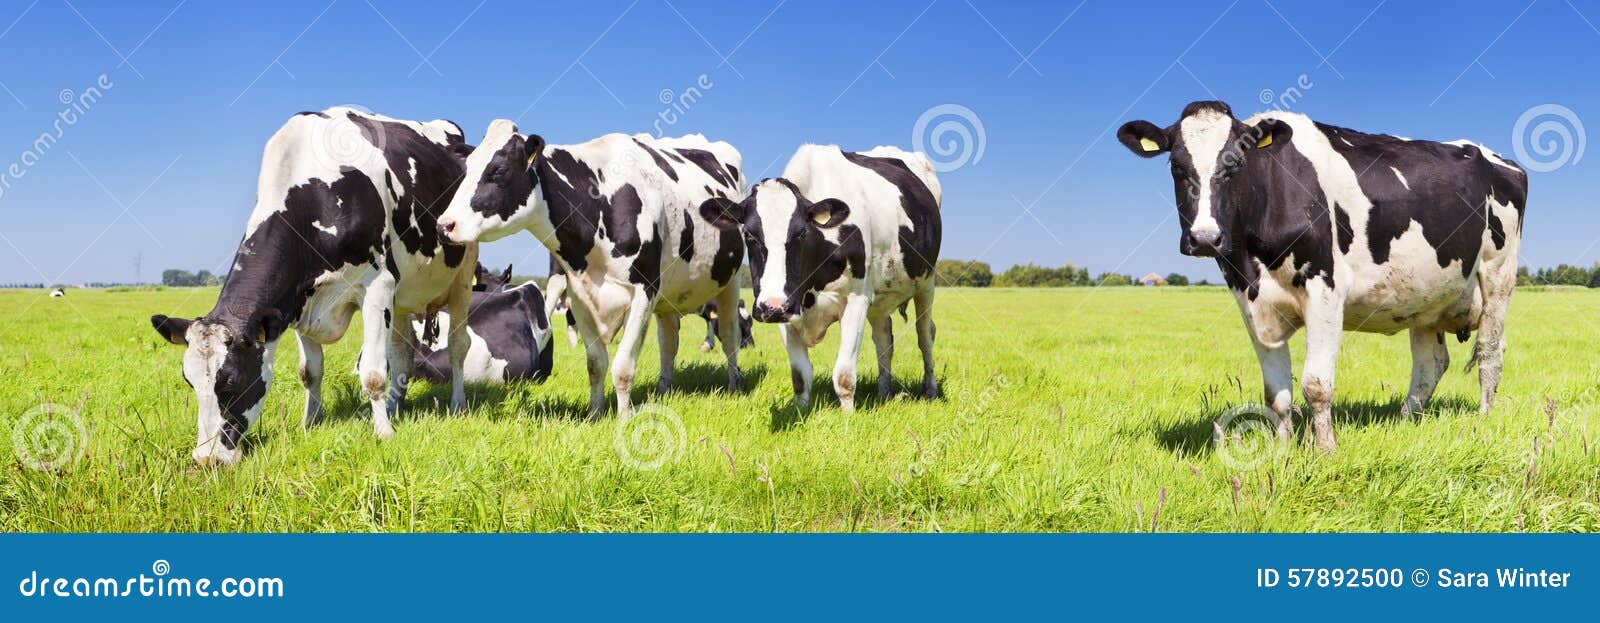 cows in a fresh grassy field on a clear day